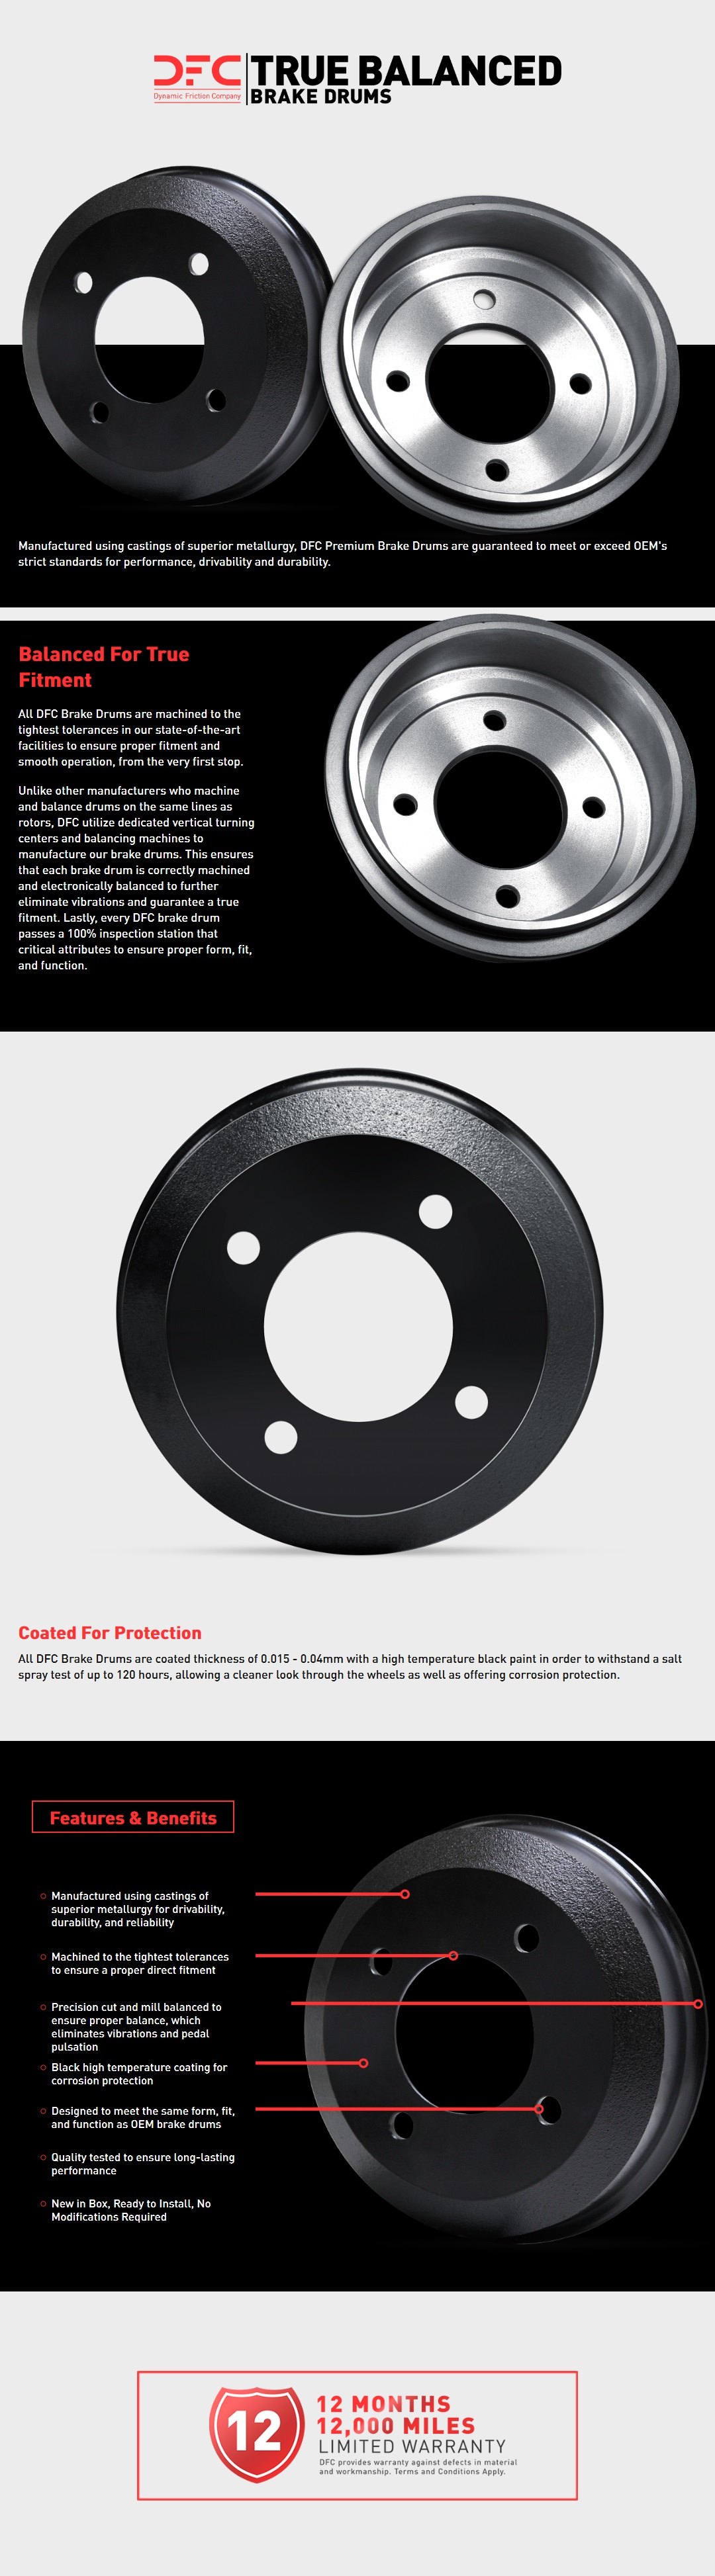 Brake Drums Features